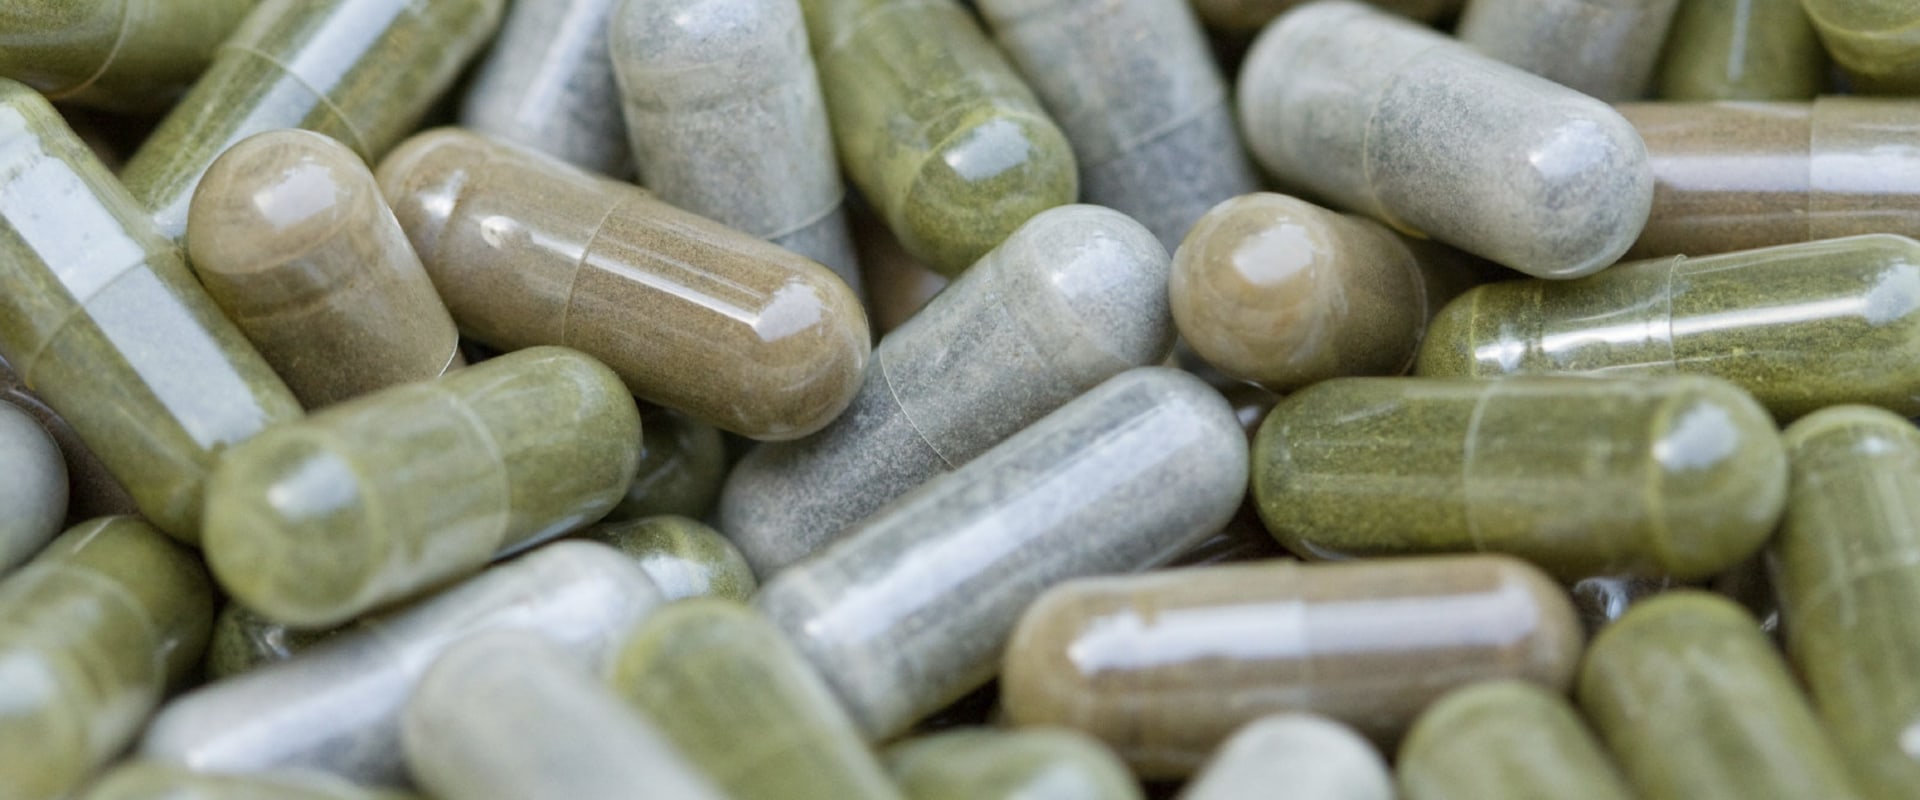 The Right Way to Take Nutritional Supplements